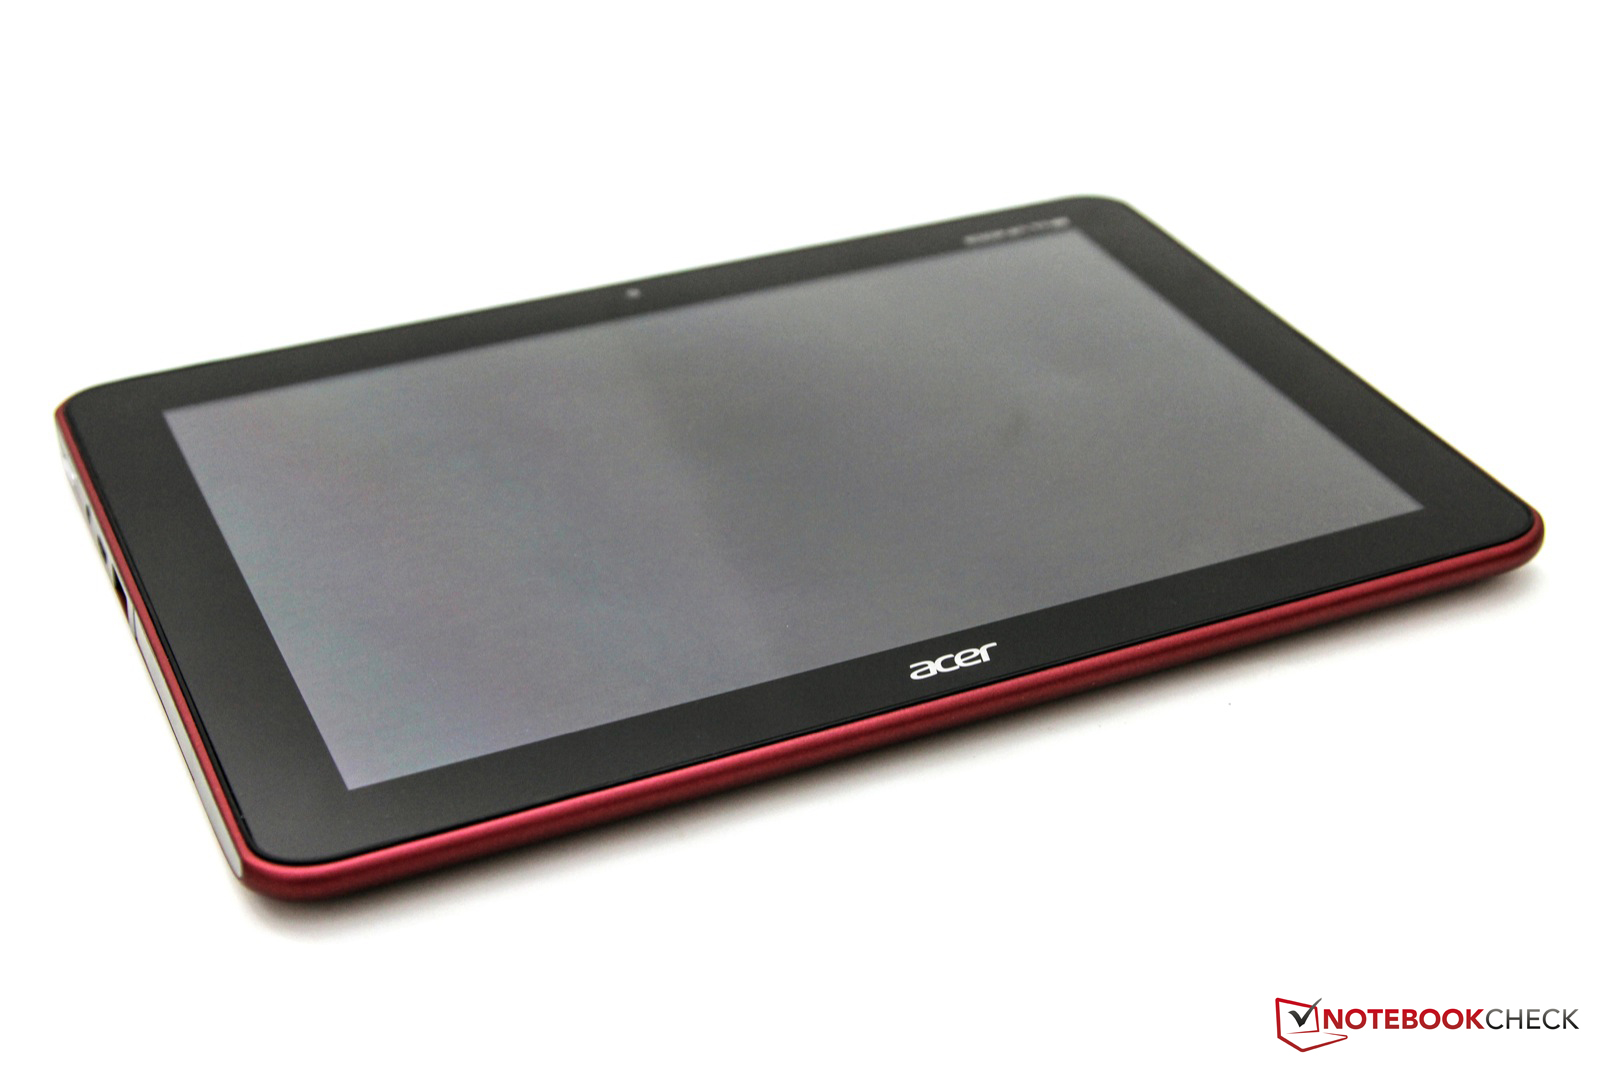 Review Acer Iconia Tab A200 Tablet/MID - NotebookCheck.net Reviews